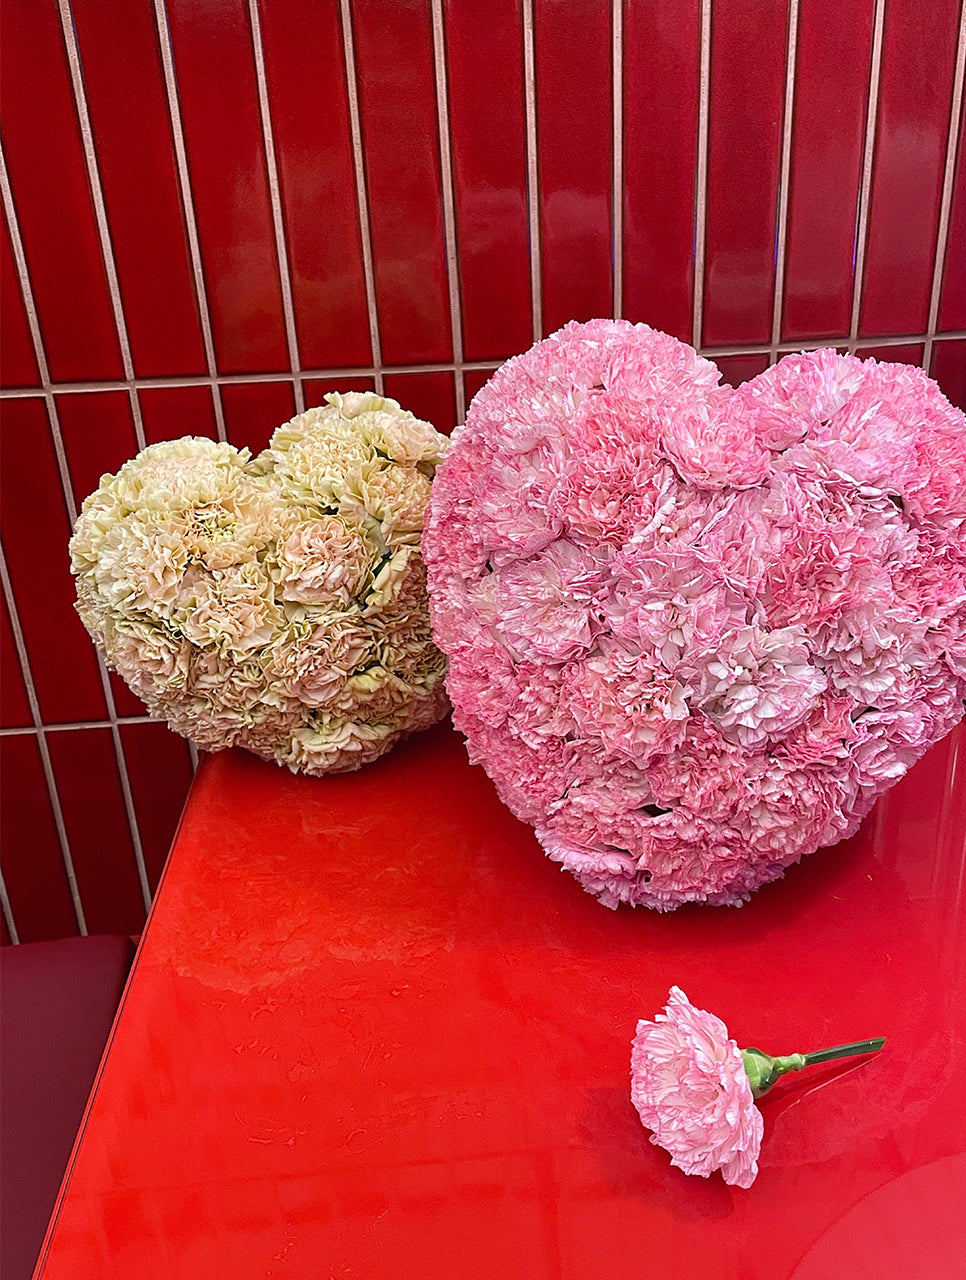 THE HEART OF CARNATIONS